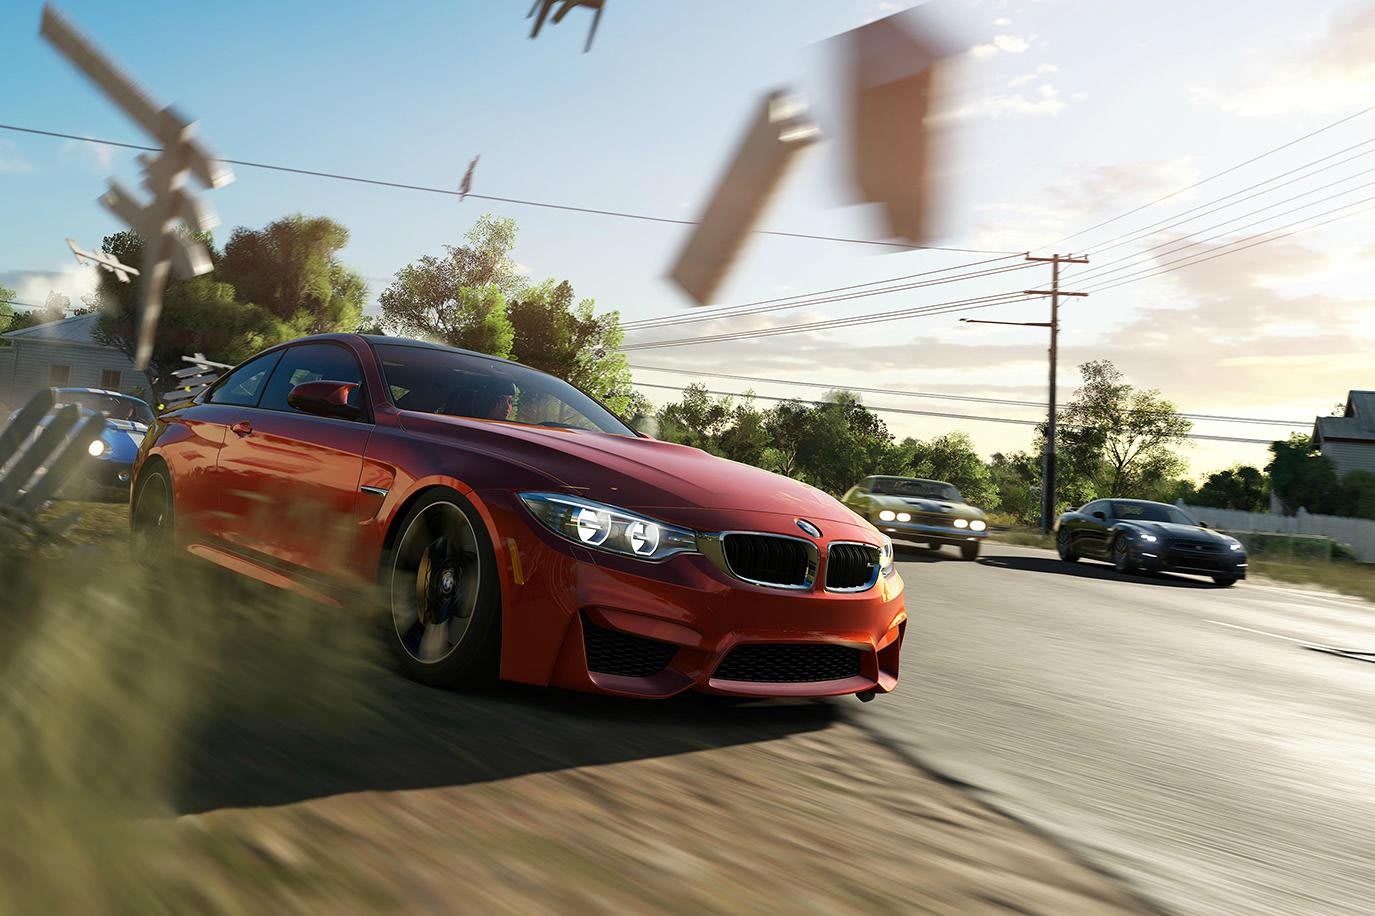 165 New Forza Horizon 3 Cars Revealed, See Them Here - GameSpot